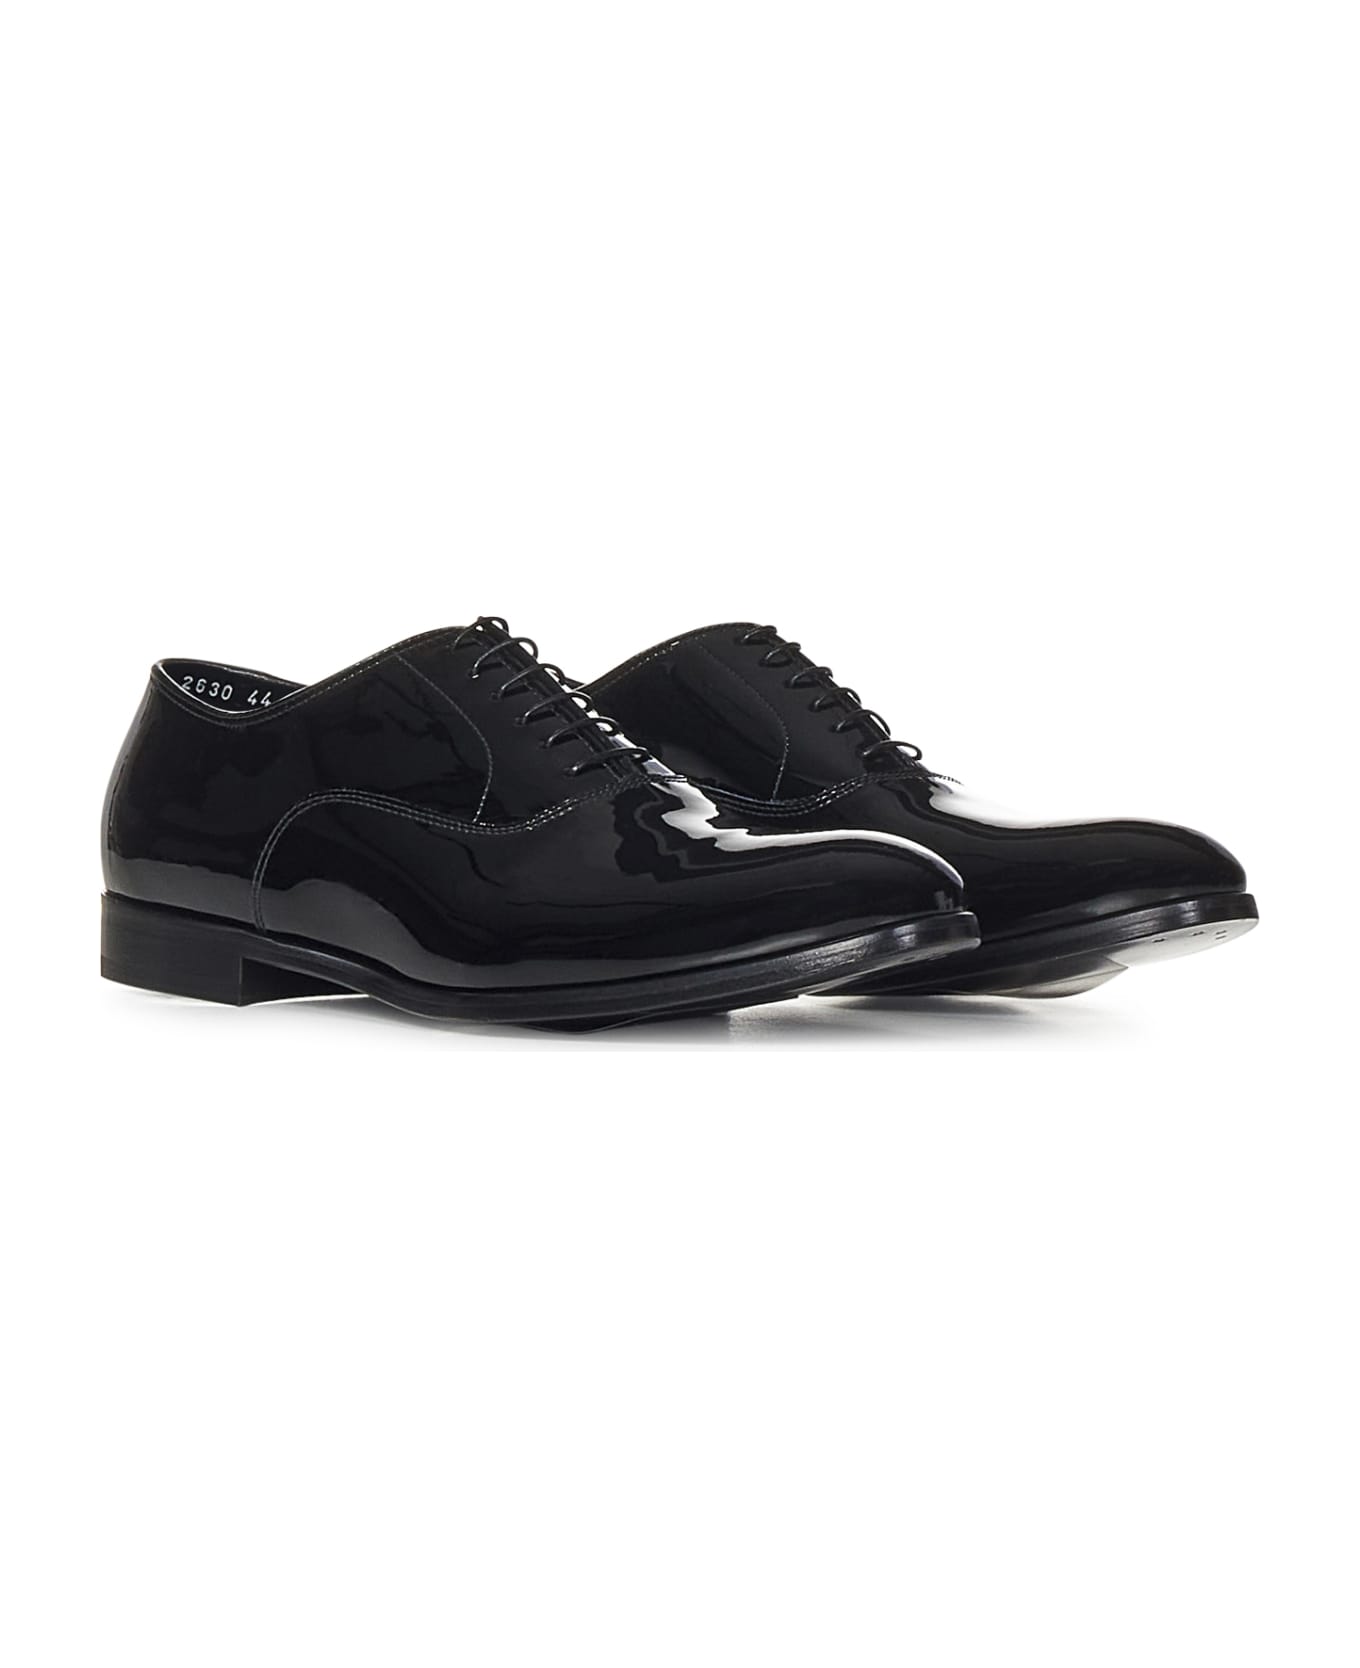 Doucal's Patent Leather Oxford Shoes - FDO NERO